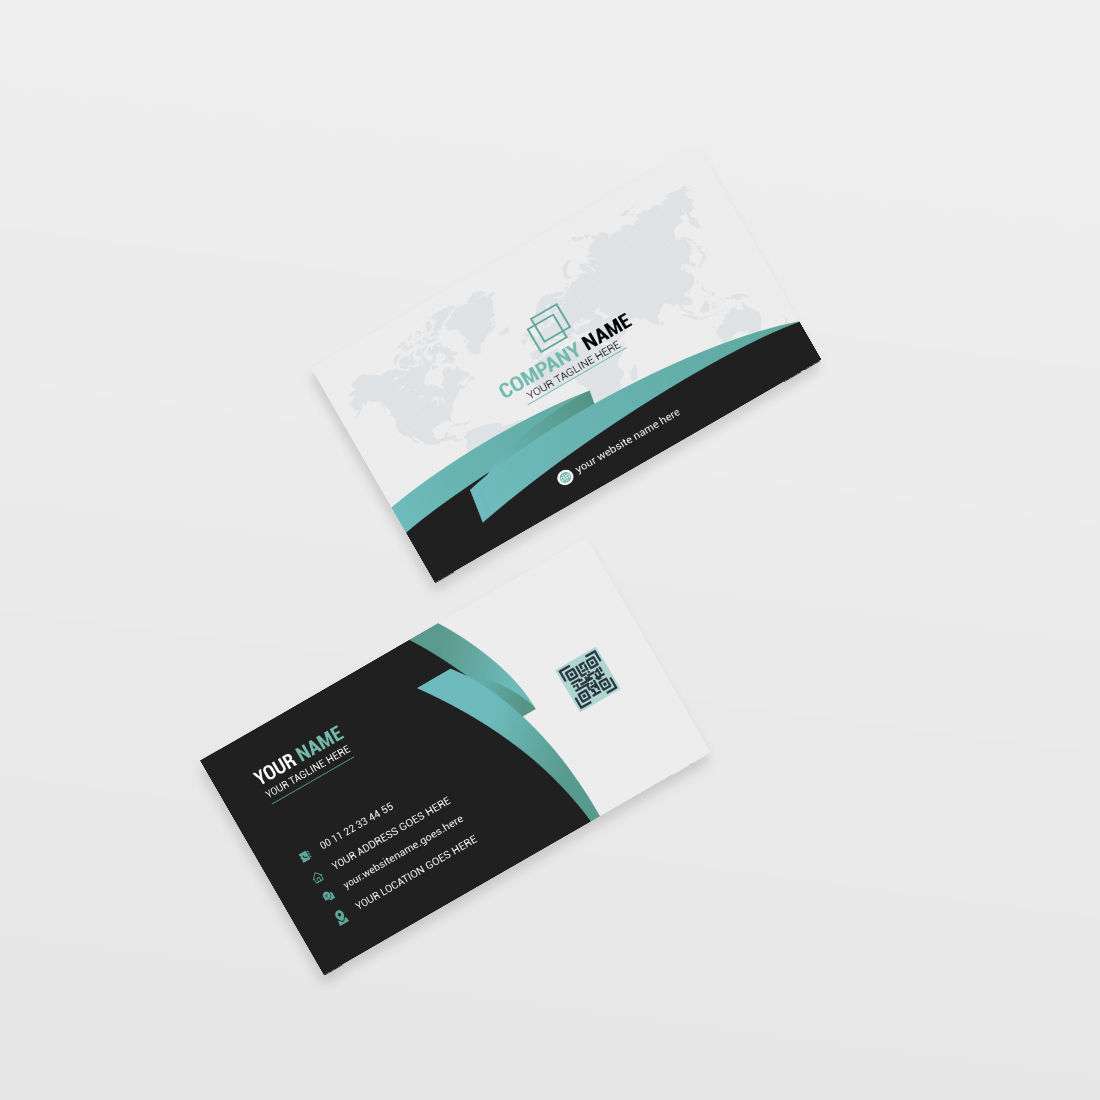 Two business cards on a white surface.